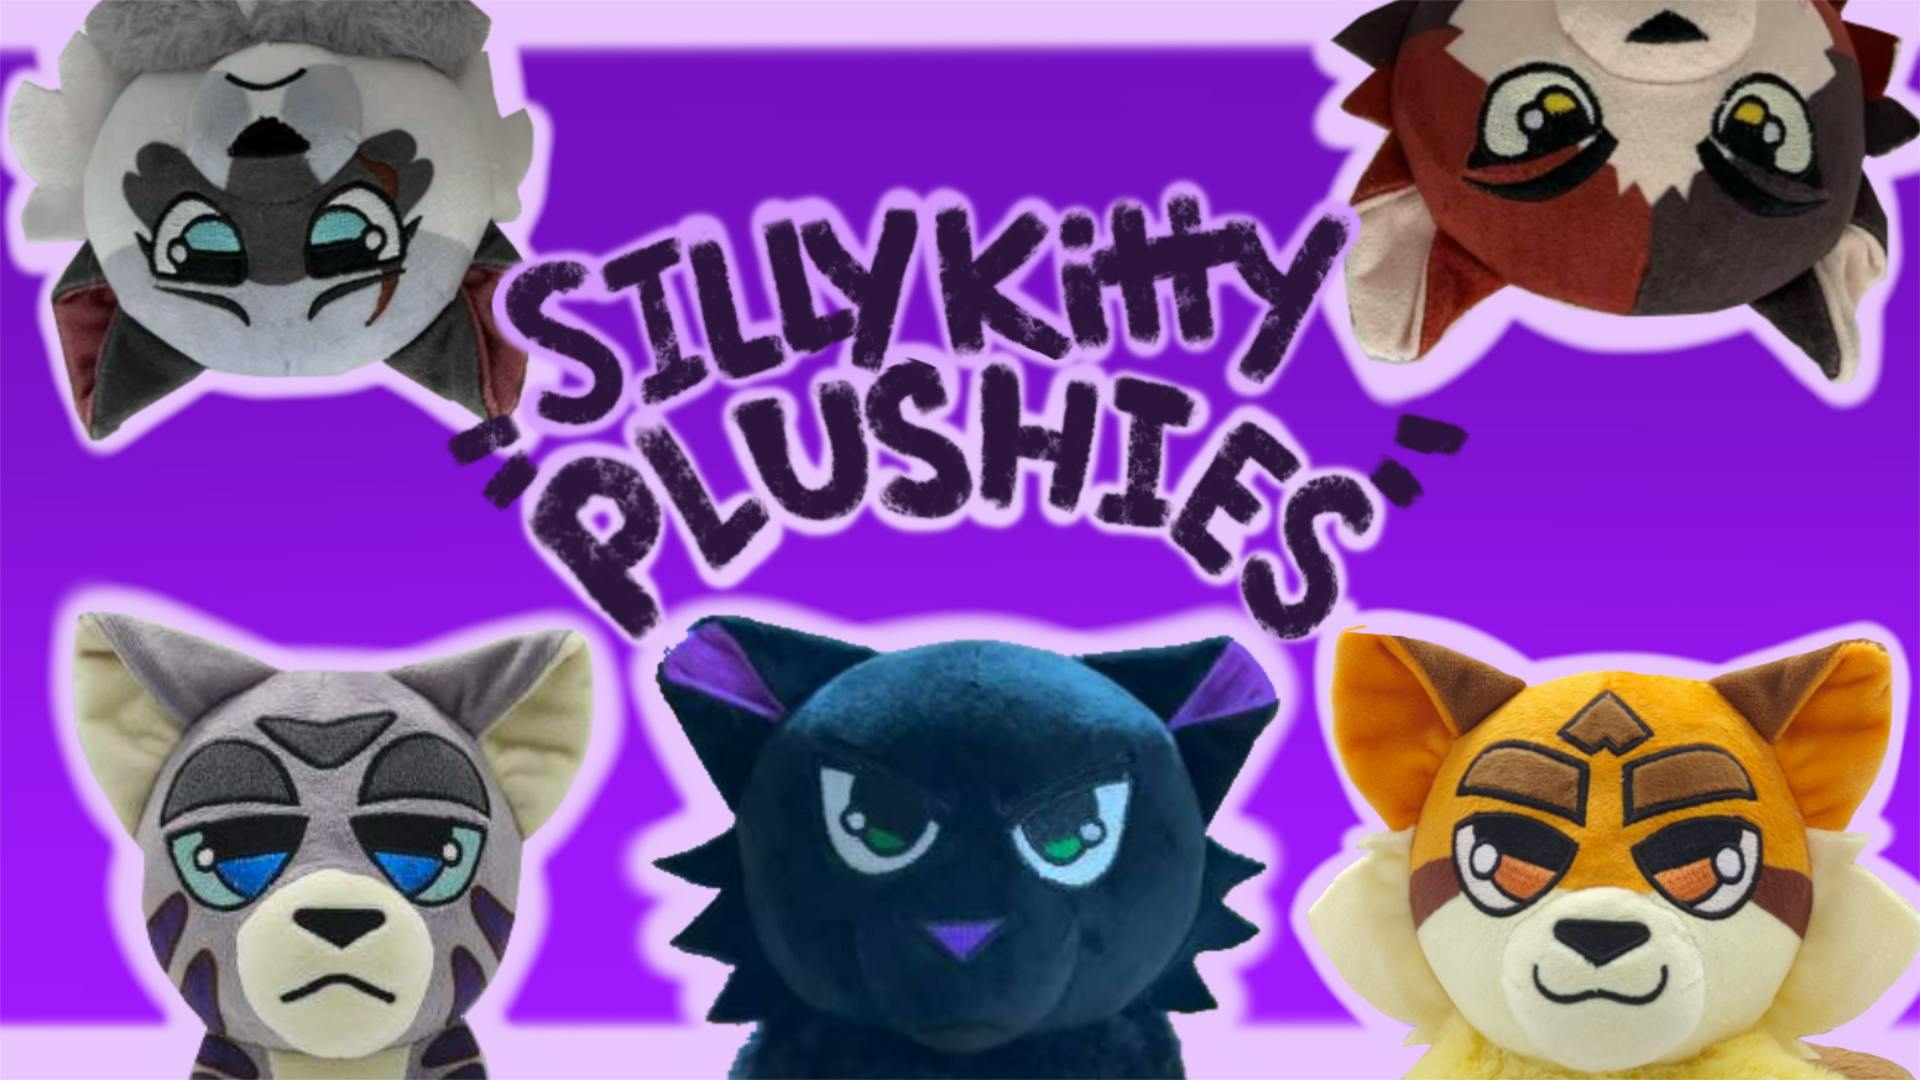 Silly Kitty Plushies